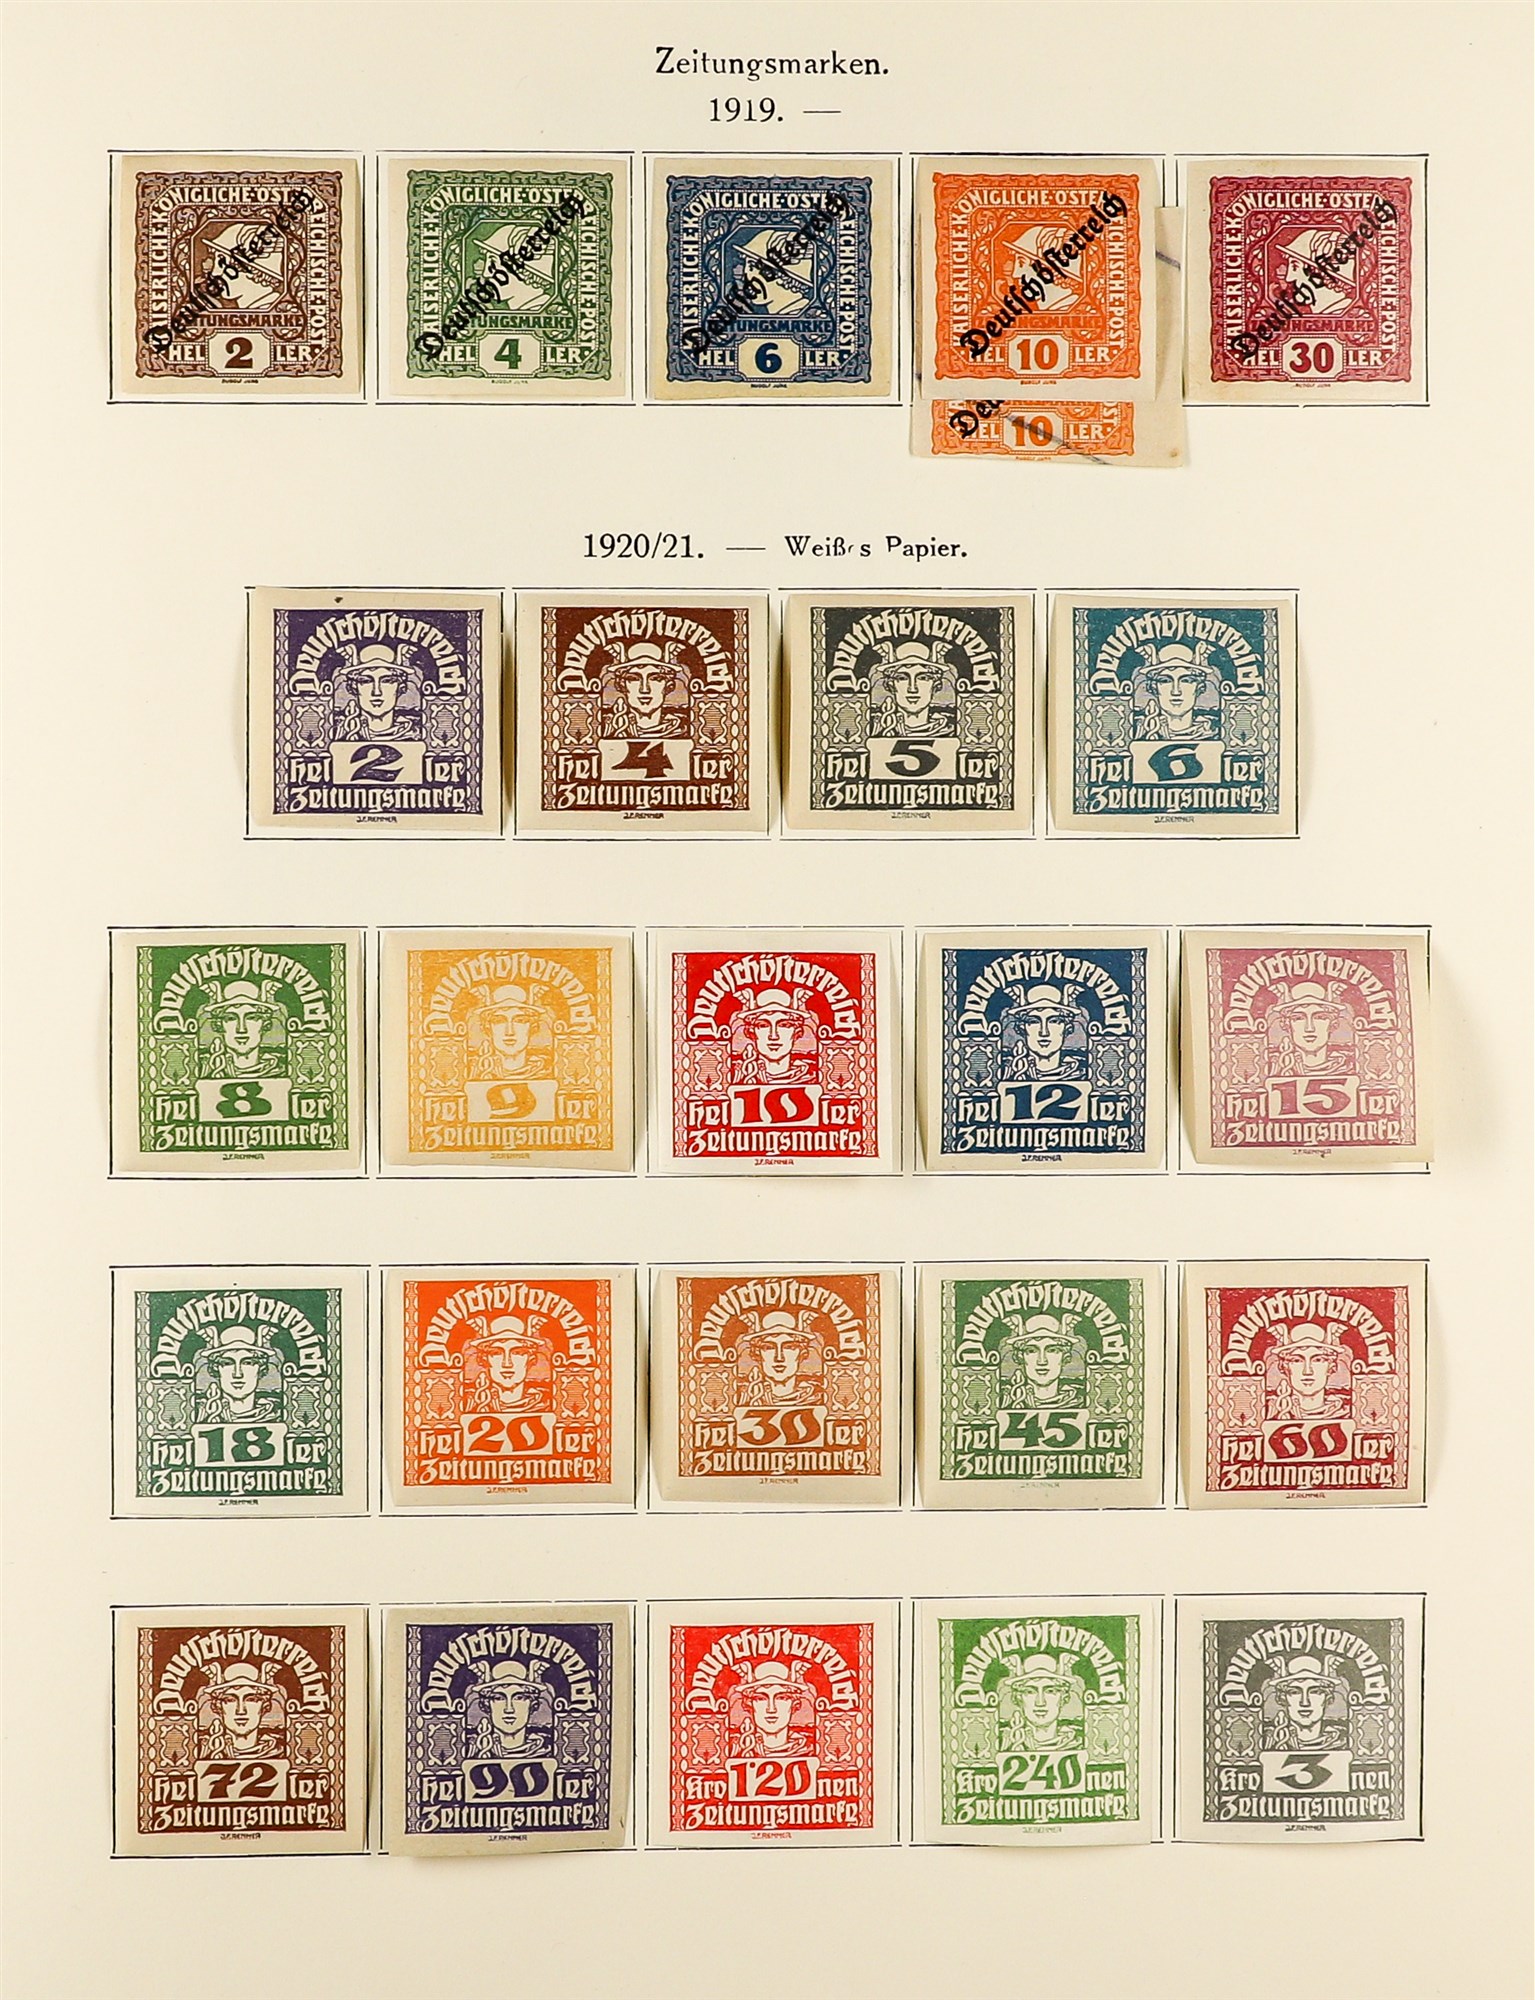 AUSTRIA 1918 - 1937 REPUBLIC COLLECTION of chiefly mint / never hinged mint sets in album incl - Image 13 of 22